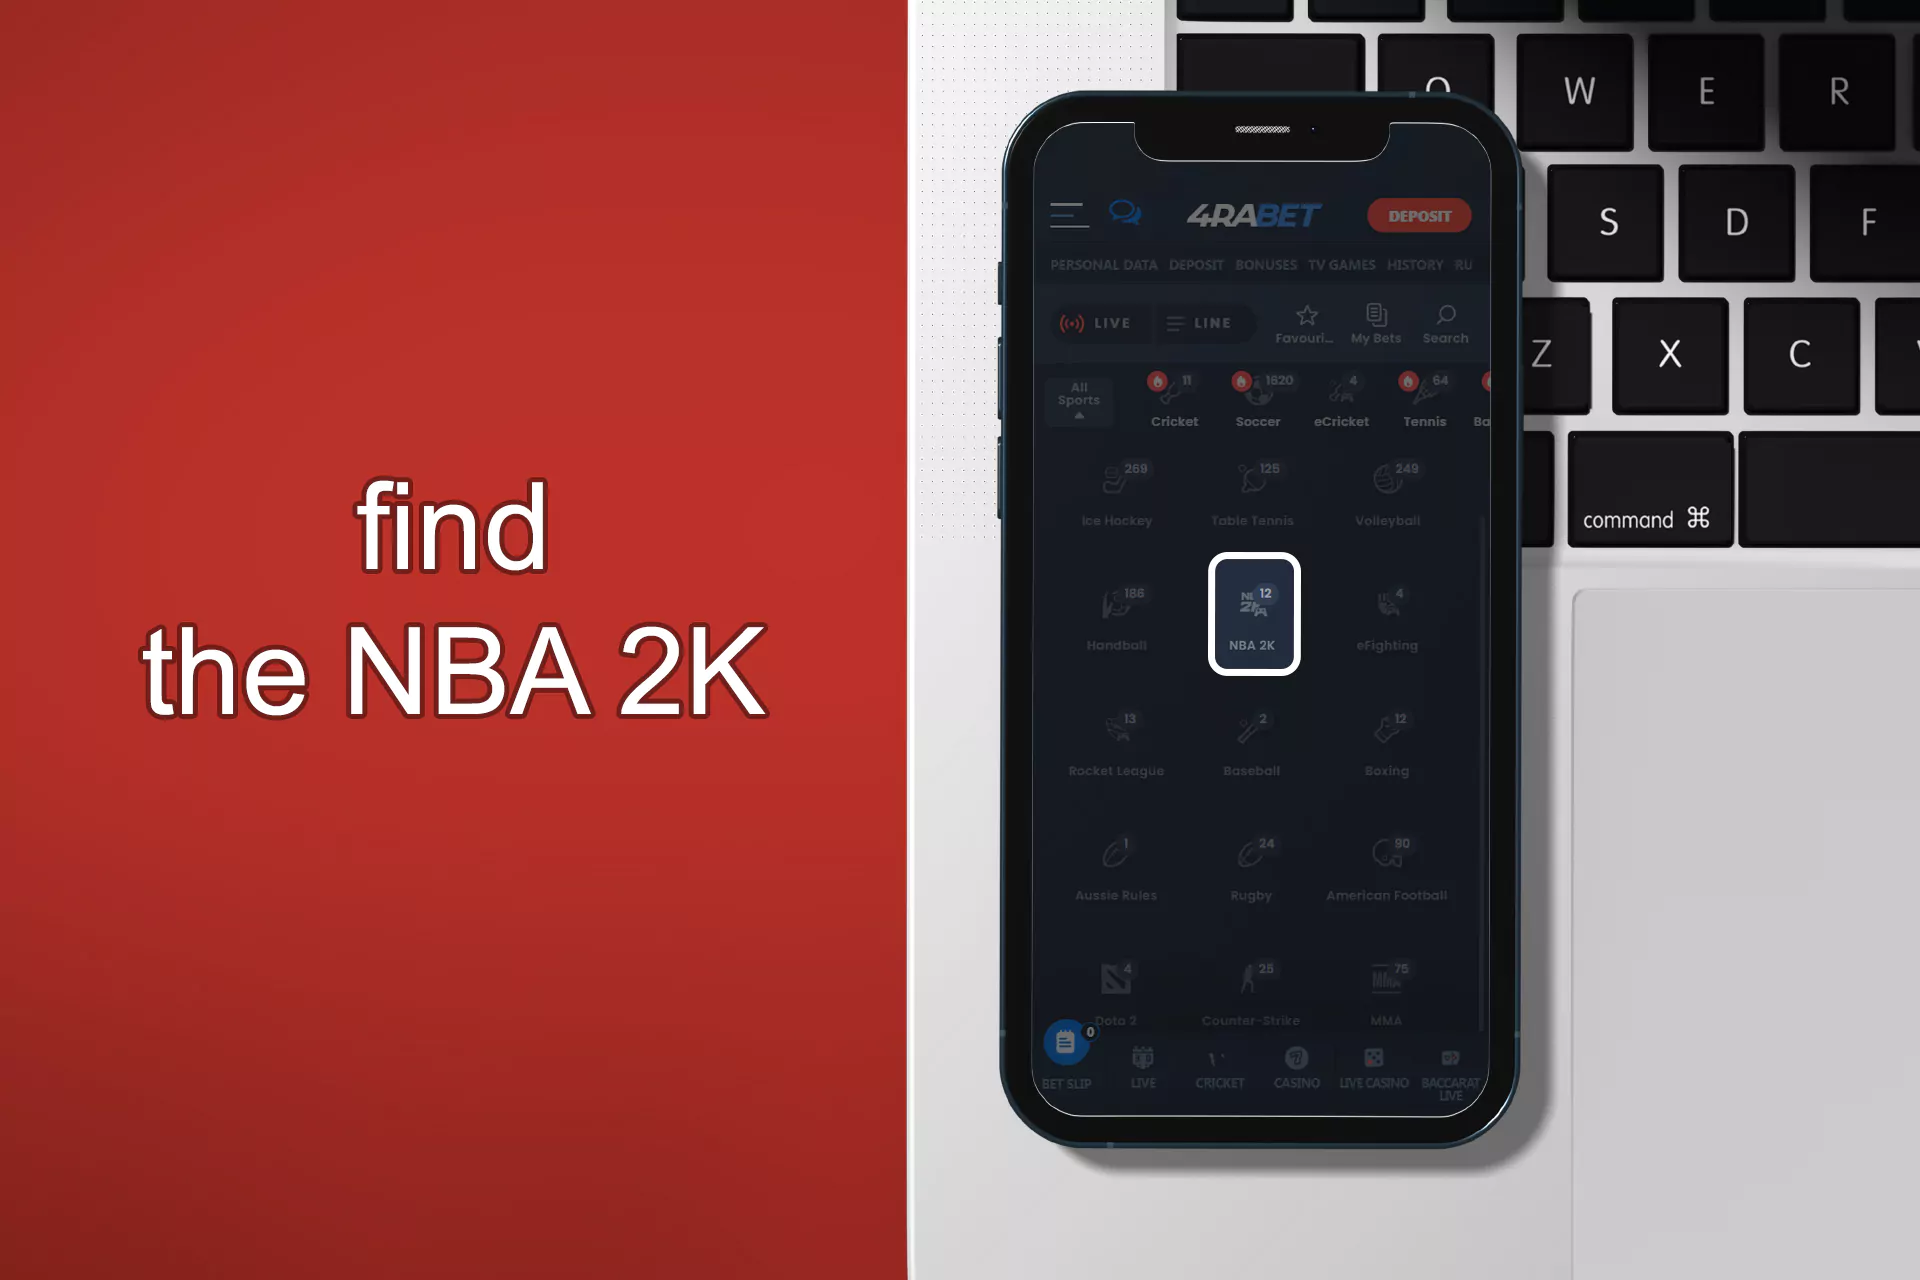 Find the NBA 2K game in the betting list and go to the section.